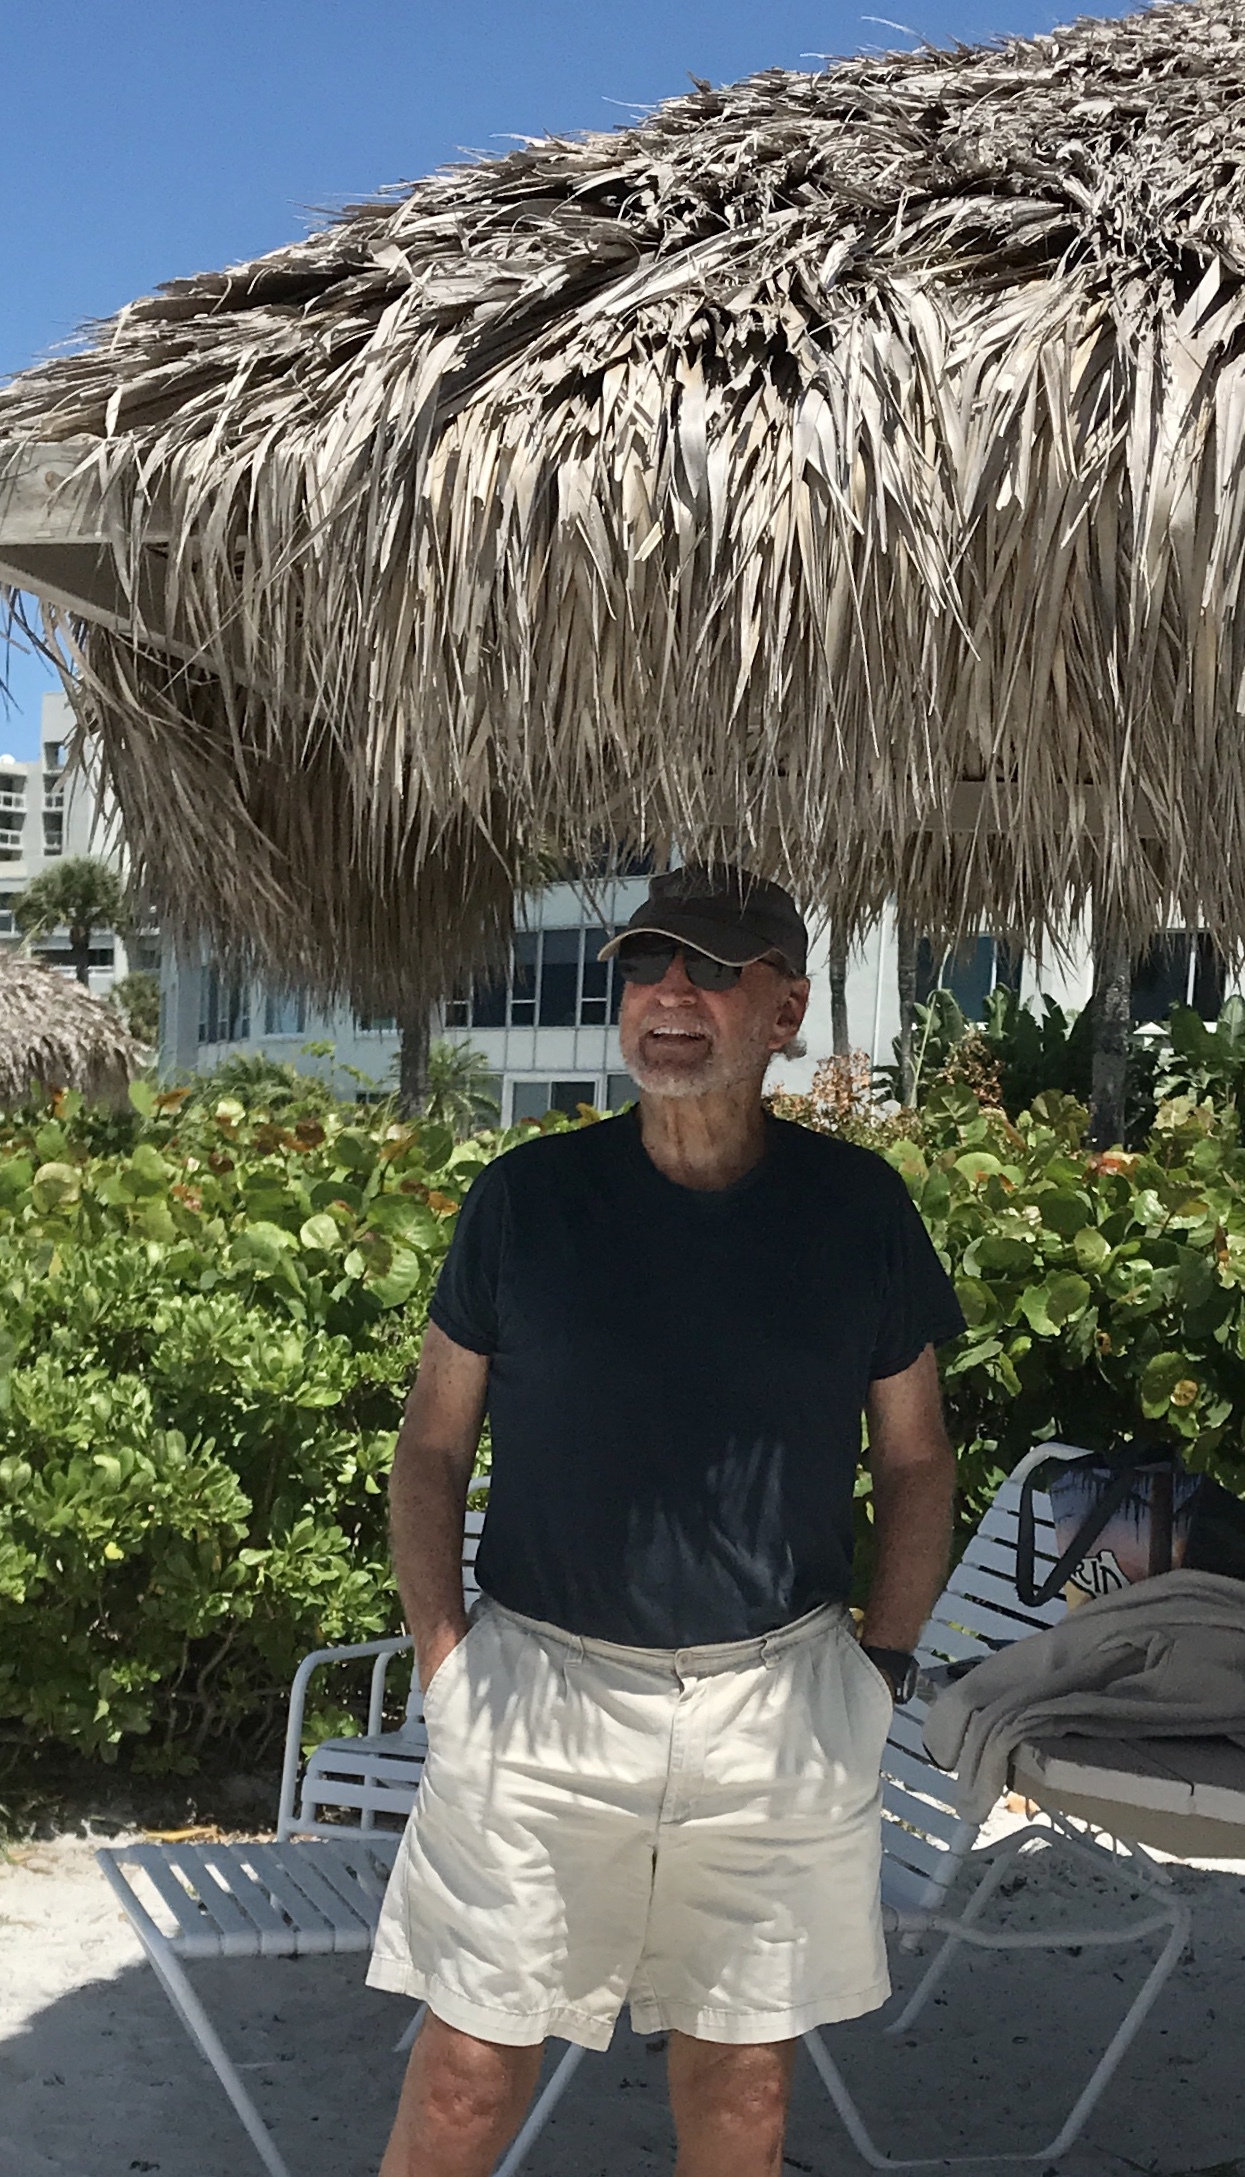 Jim Marquardt, who has submitted his journals to the Sag Harbor Historical Society for its COVID-19 journaling project, has been stranded in Longboat Key, Florida. COURTESY JIM MARQUARDT